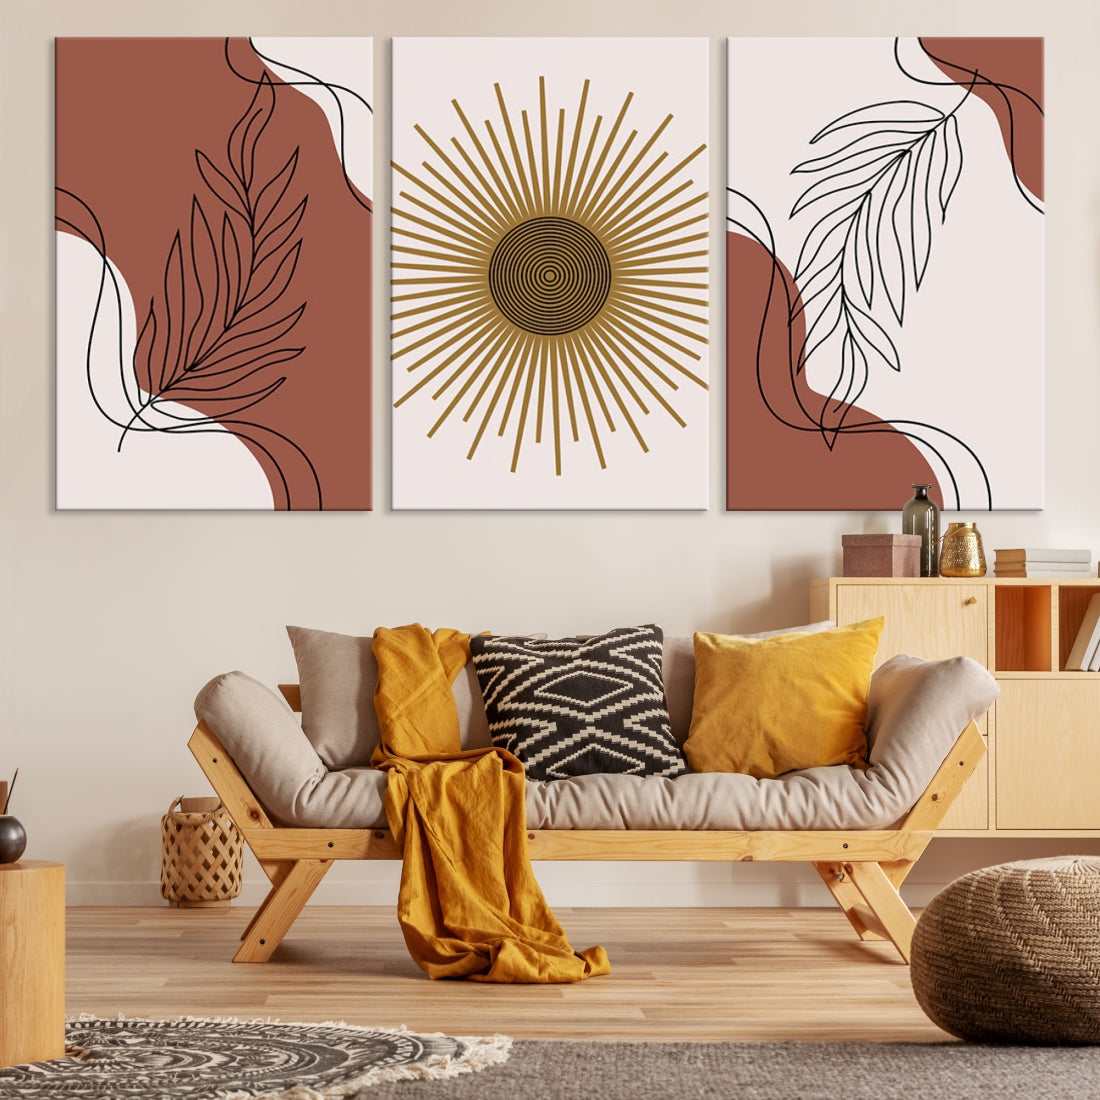 Boho Floral Lines and Sun Canvas Large Wall Art Mid Century Modern Print